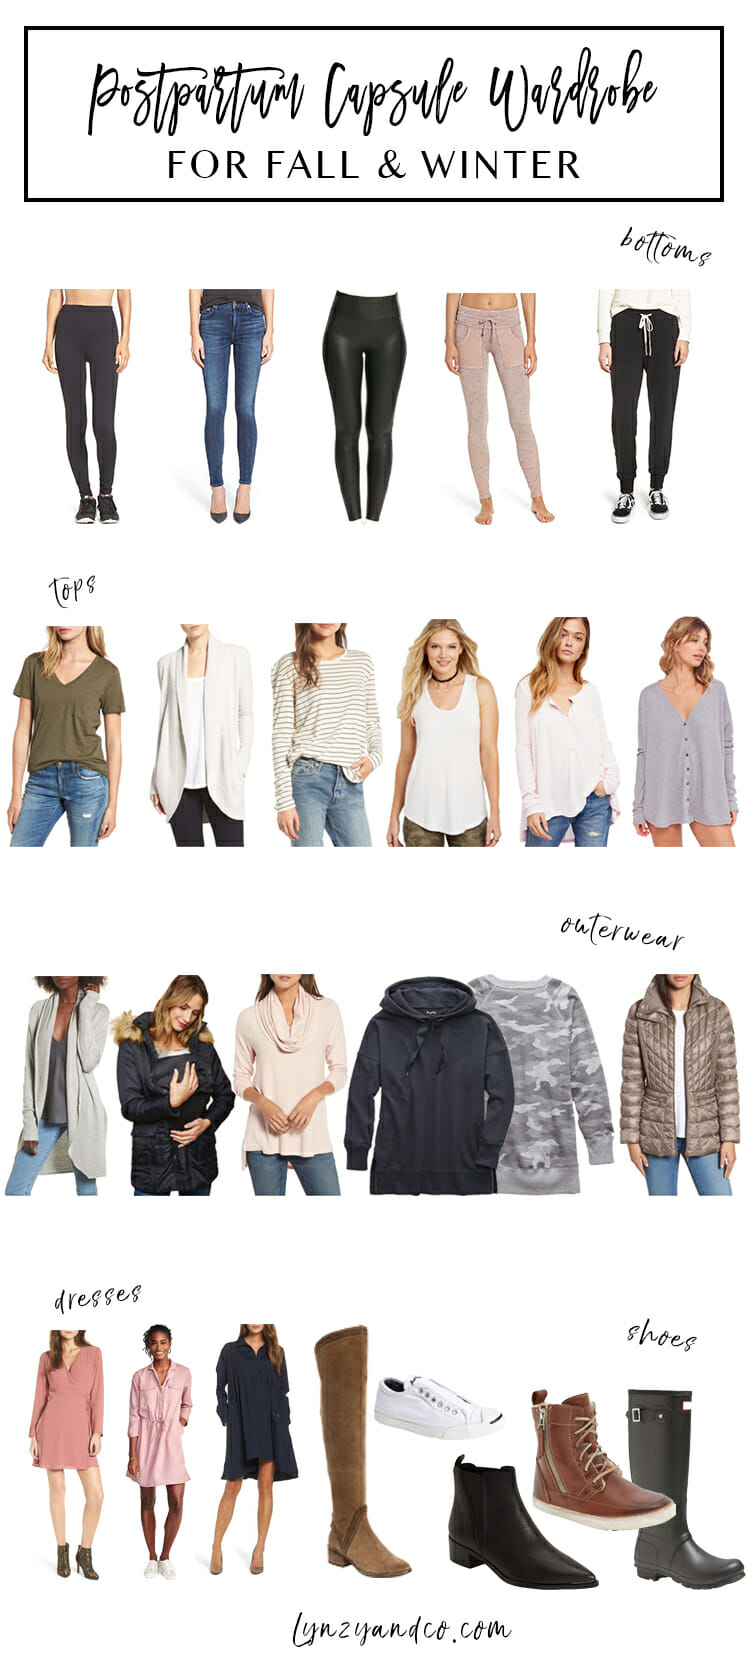 Motherhood blogger Lynzy & Co. talks bout Building a post partum capsule wardrobe for moms in this informative blog post!